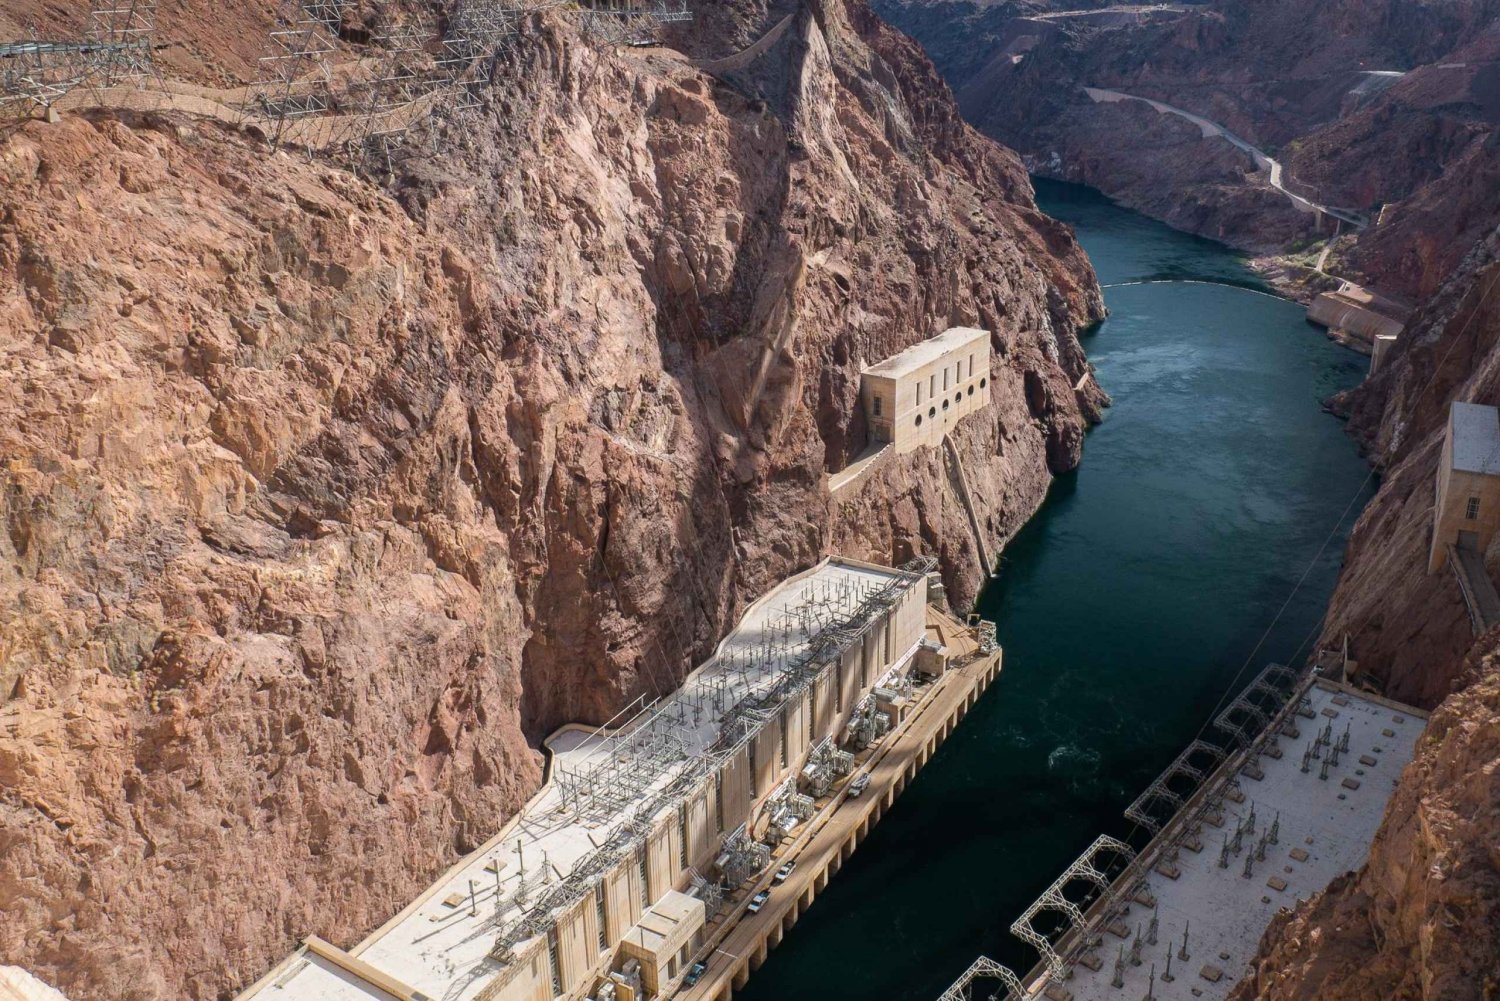 Las Vegas: Hoover Dam, Valley of Fire, Lake Mead Day Tour